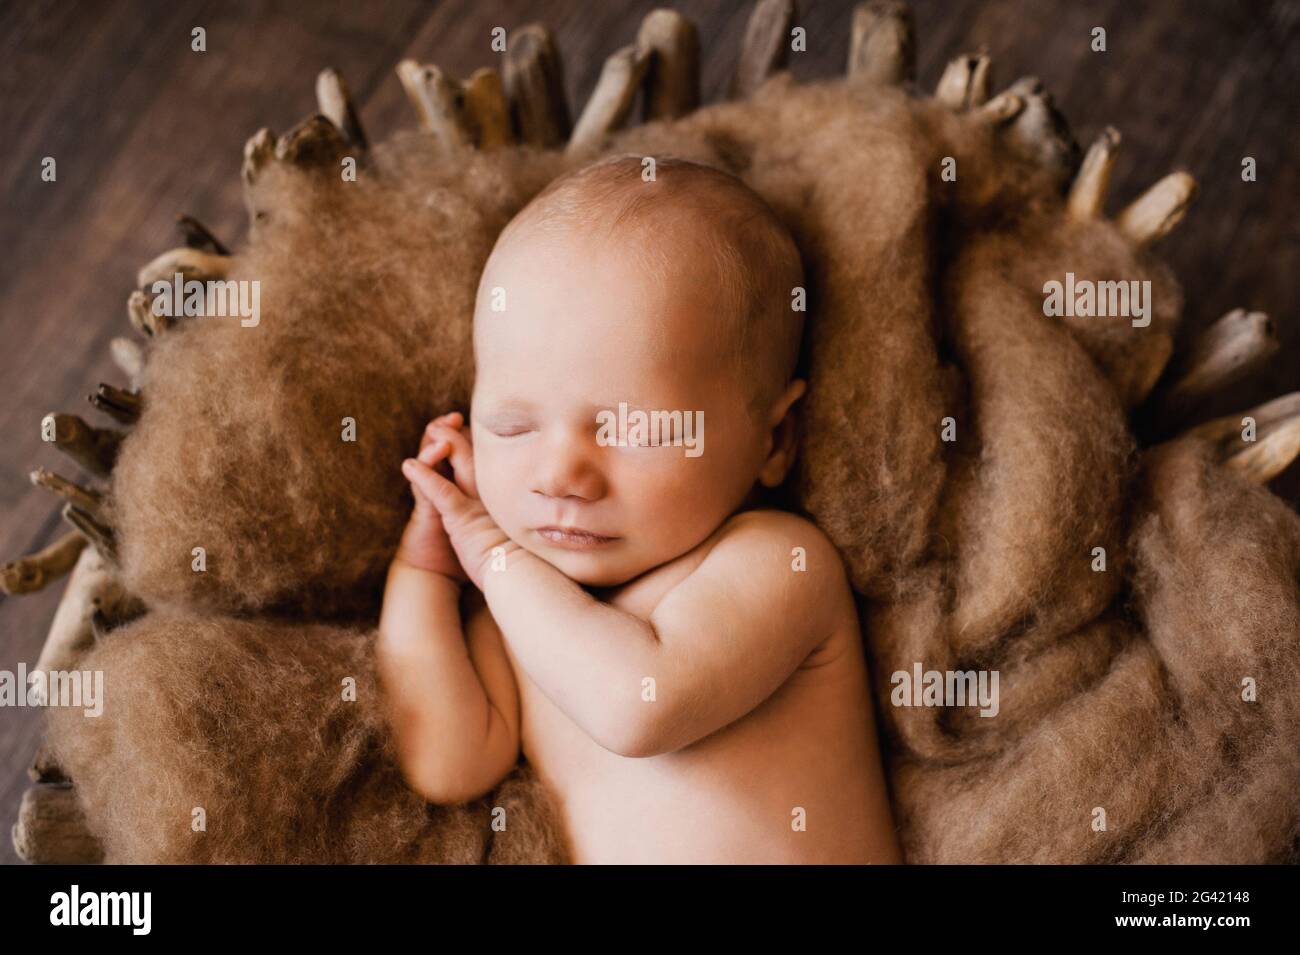 An infant sleeping with her hands under her cheeks at a newborn photoshoot Stock Photo